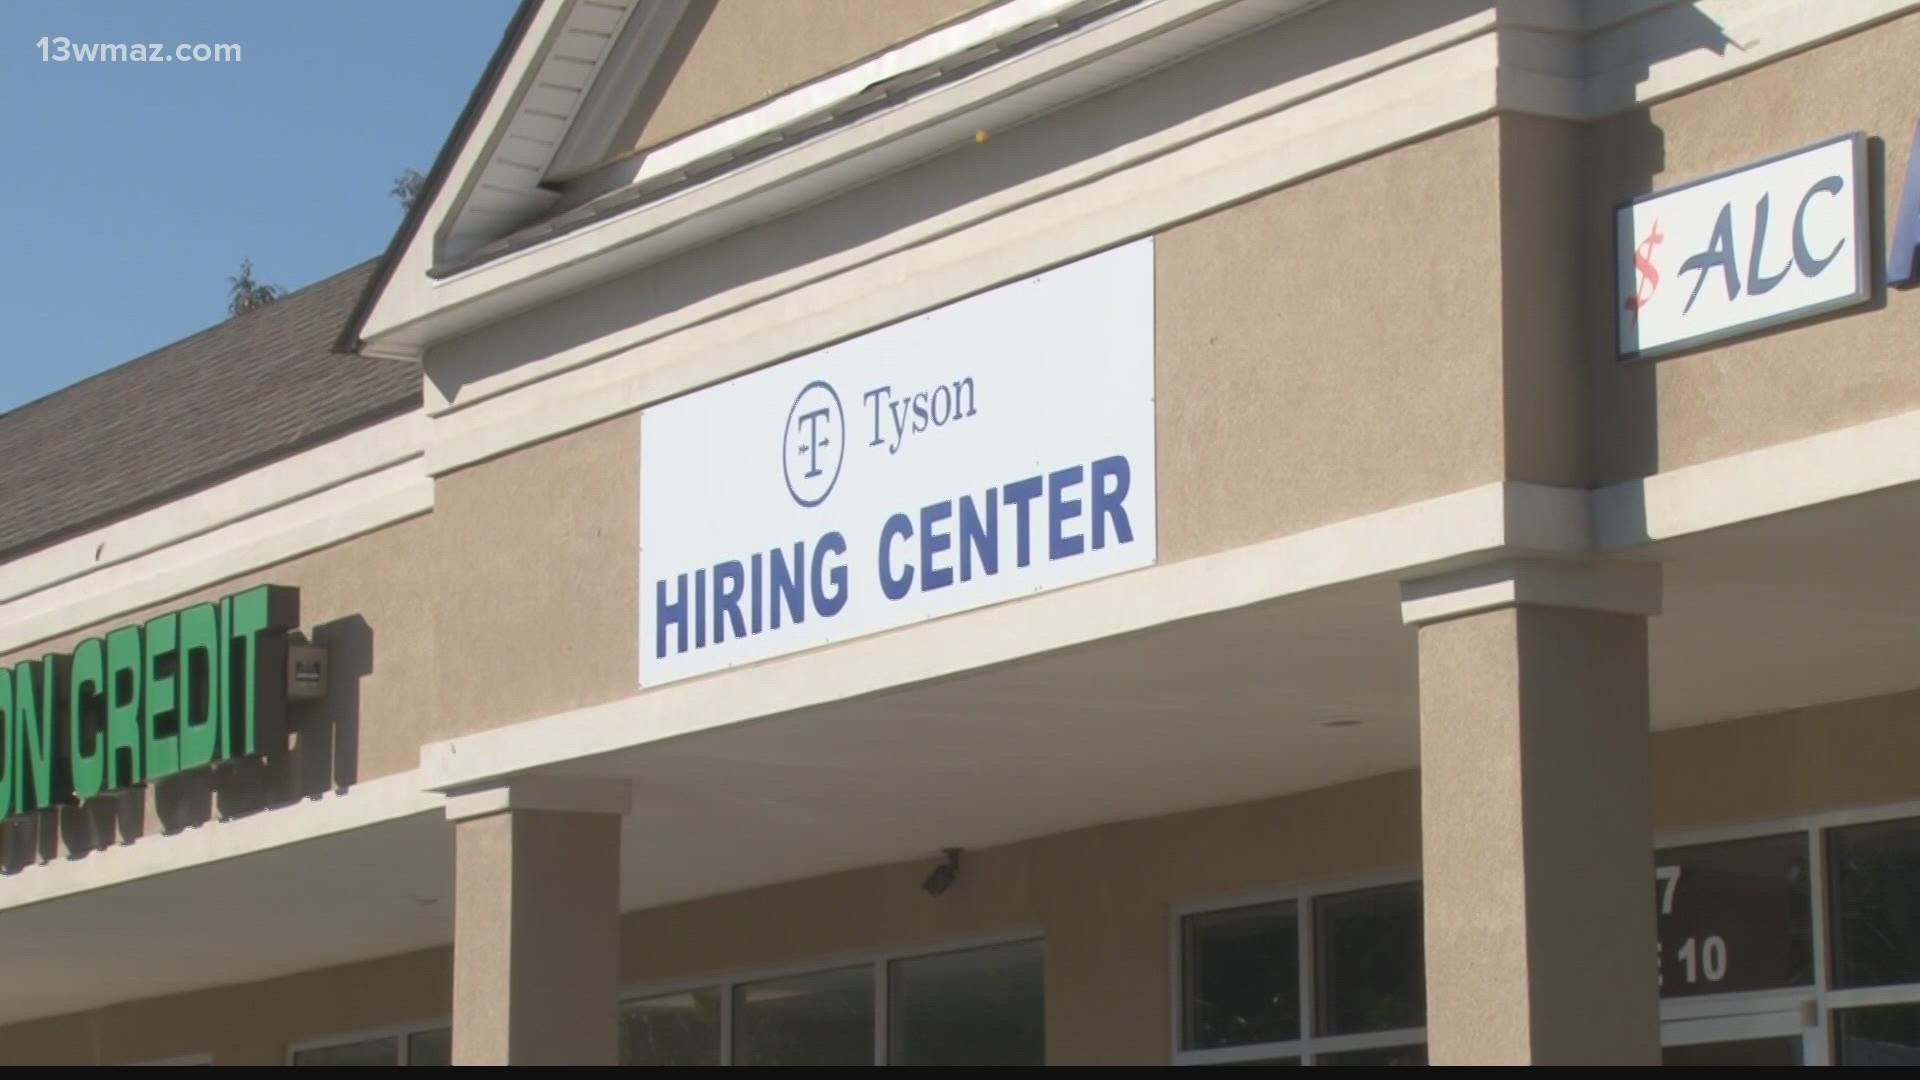 Tyson hopes to hire more people for their Vienna plant, but you did not have to fill out a job application to take part in the giveaway.